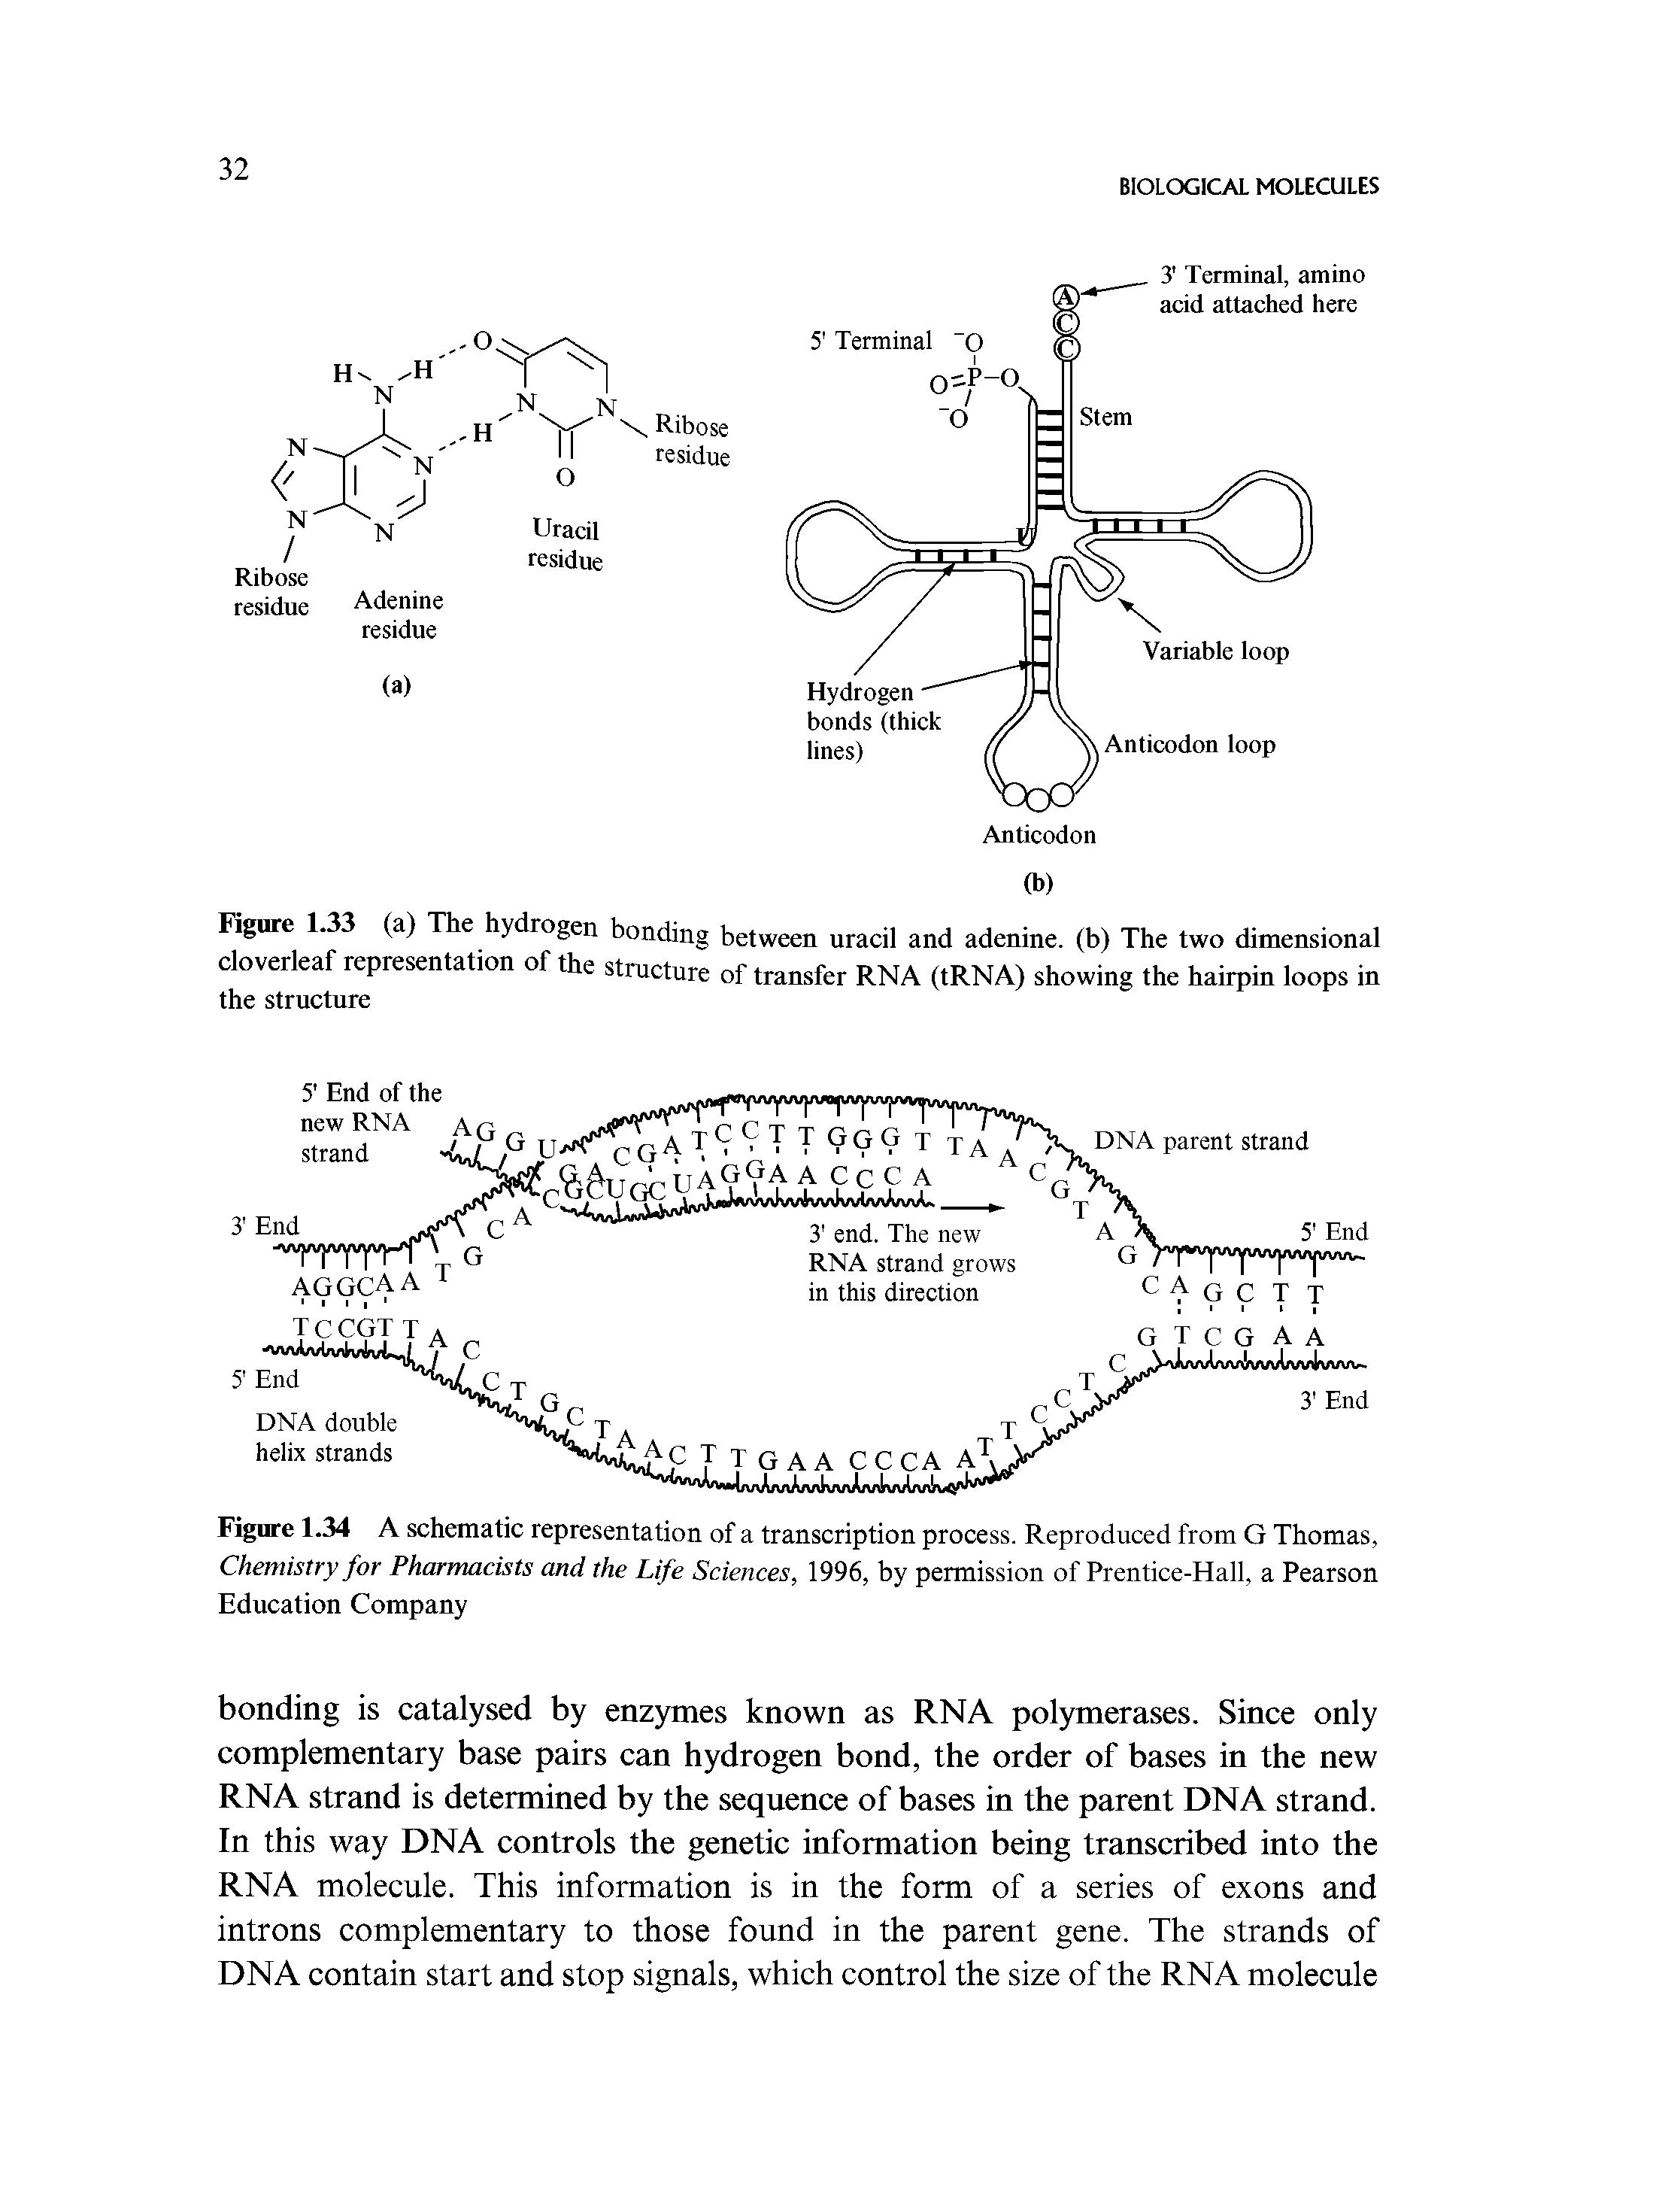 Figure 1.34 A schematic representation of a transcription process. Reproduced from G Thomas, Chemistry for Pharmacists and the Life Sciences, 1996, by permission of Prentice-Hall, a Pearson Education Company...